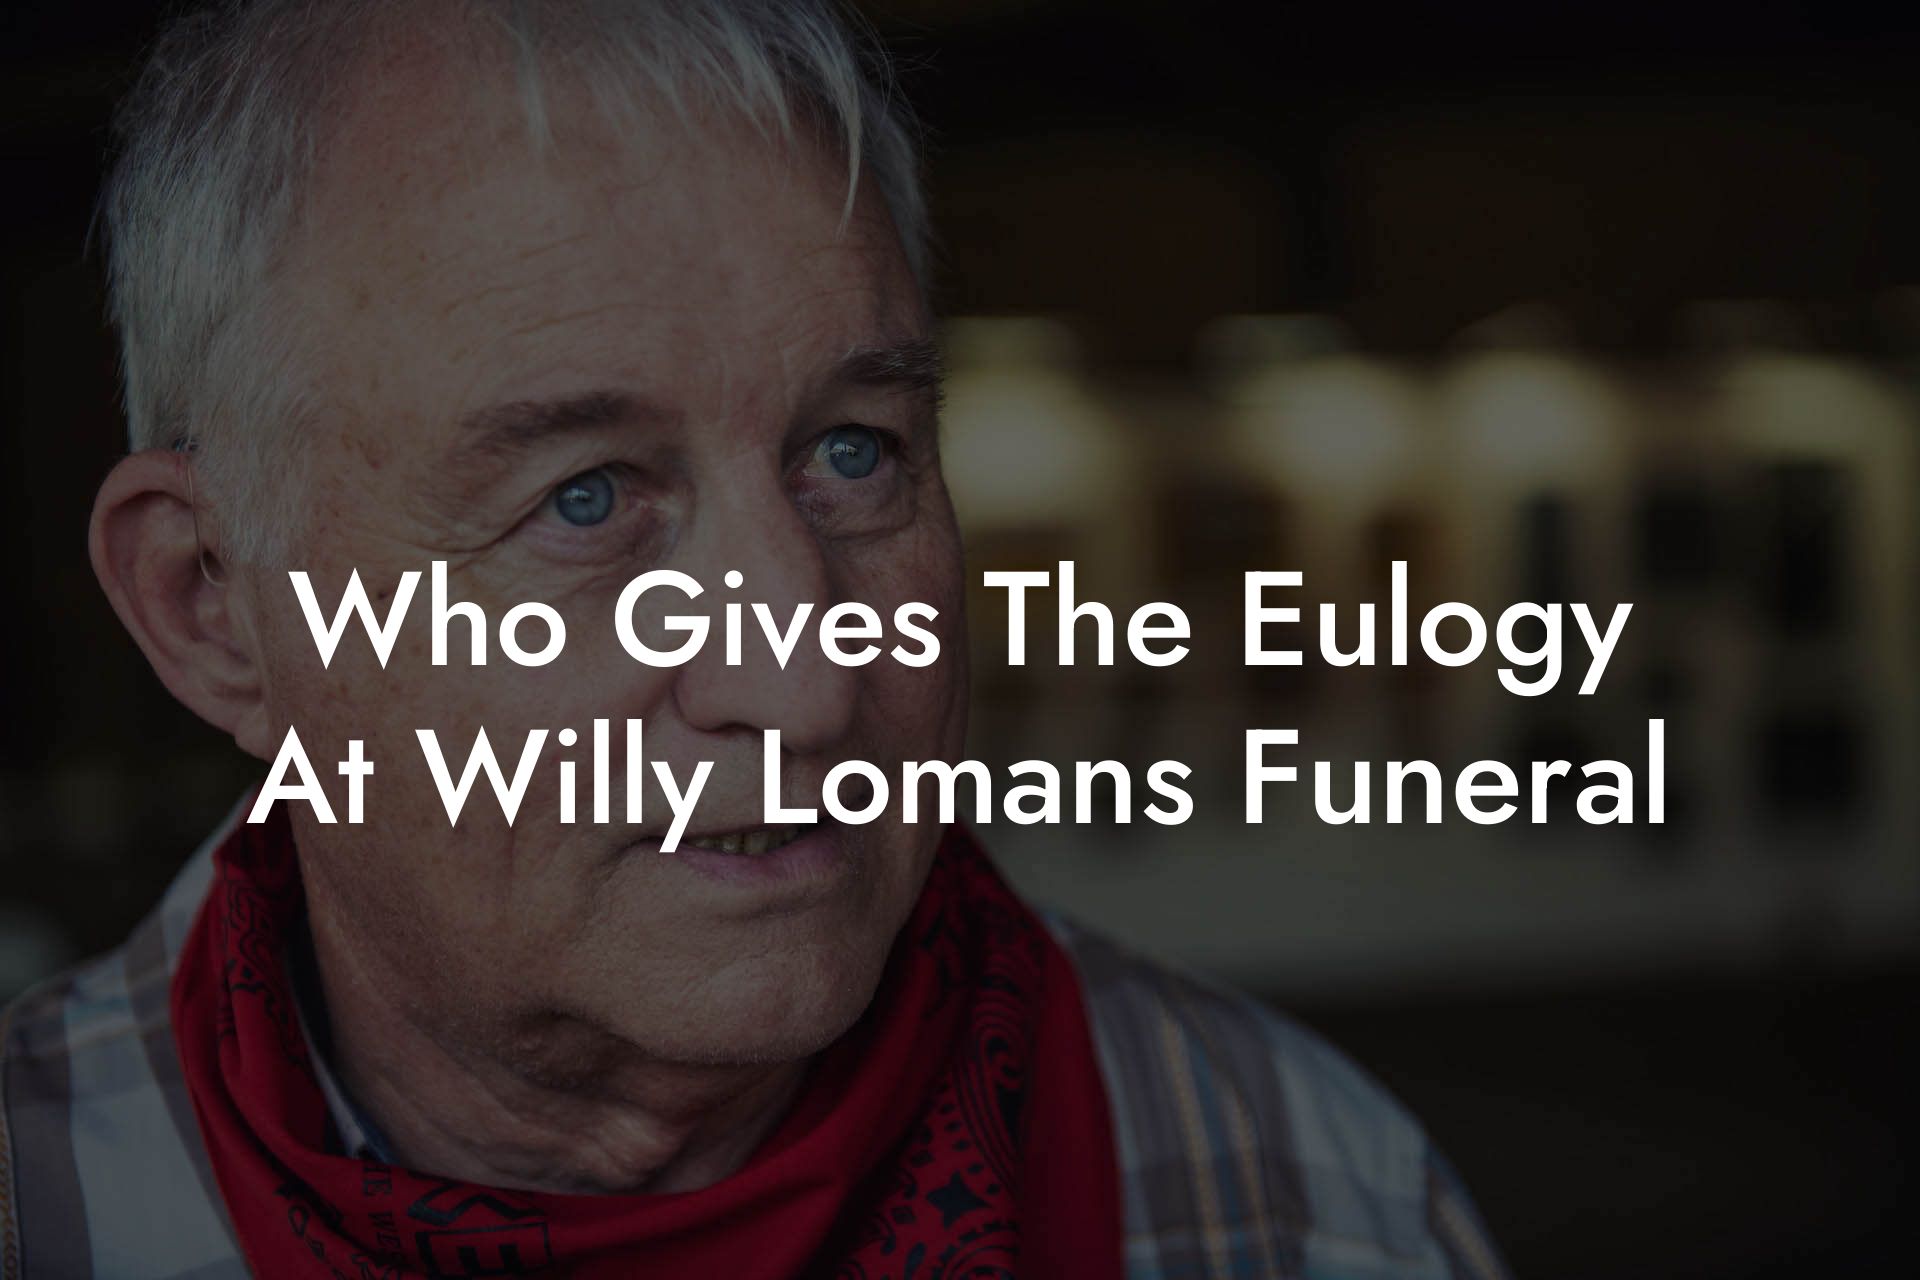 Who Gives The Eulogy At Willy Loman's Funeral